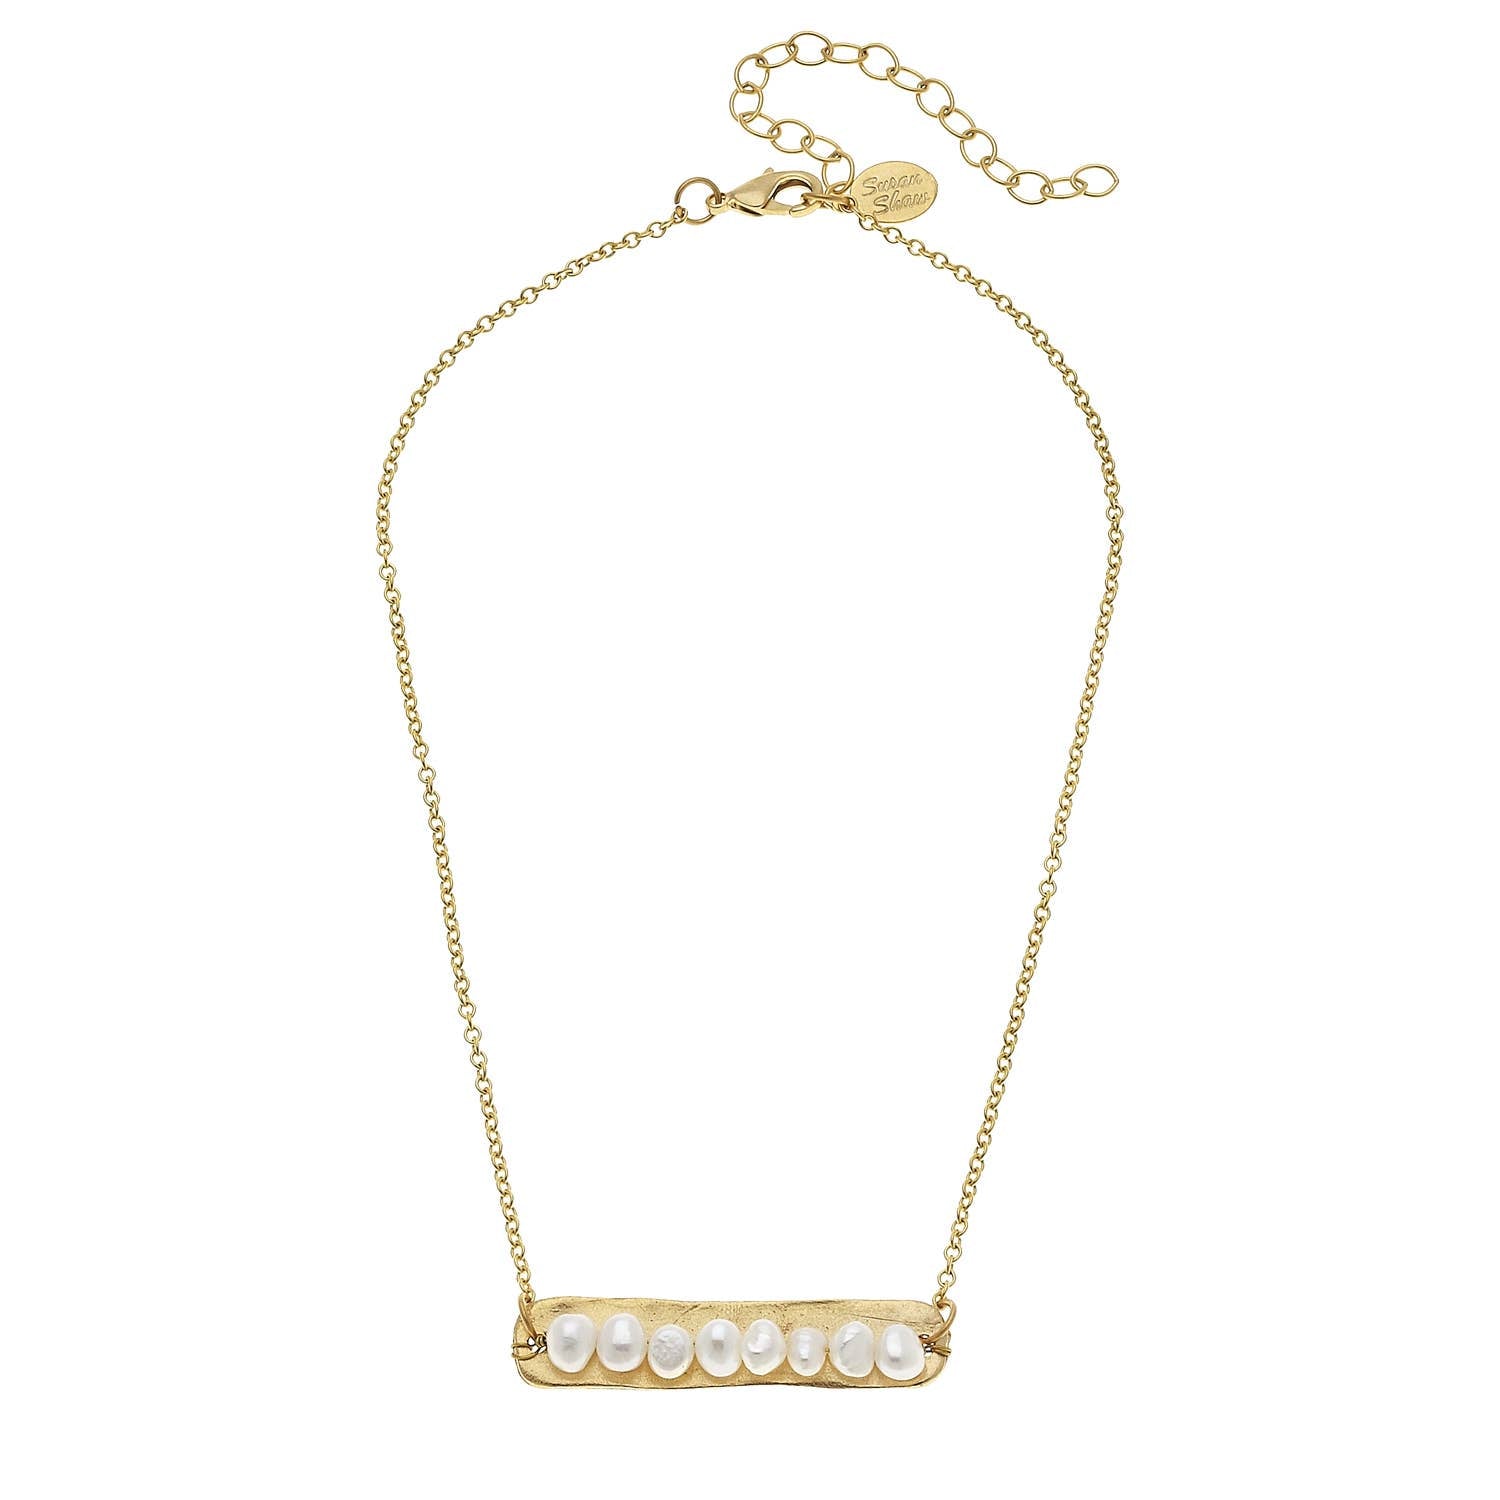 Genuine Freshwater Pearls on Gold Bar Necklace